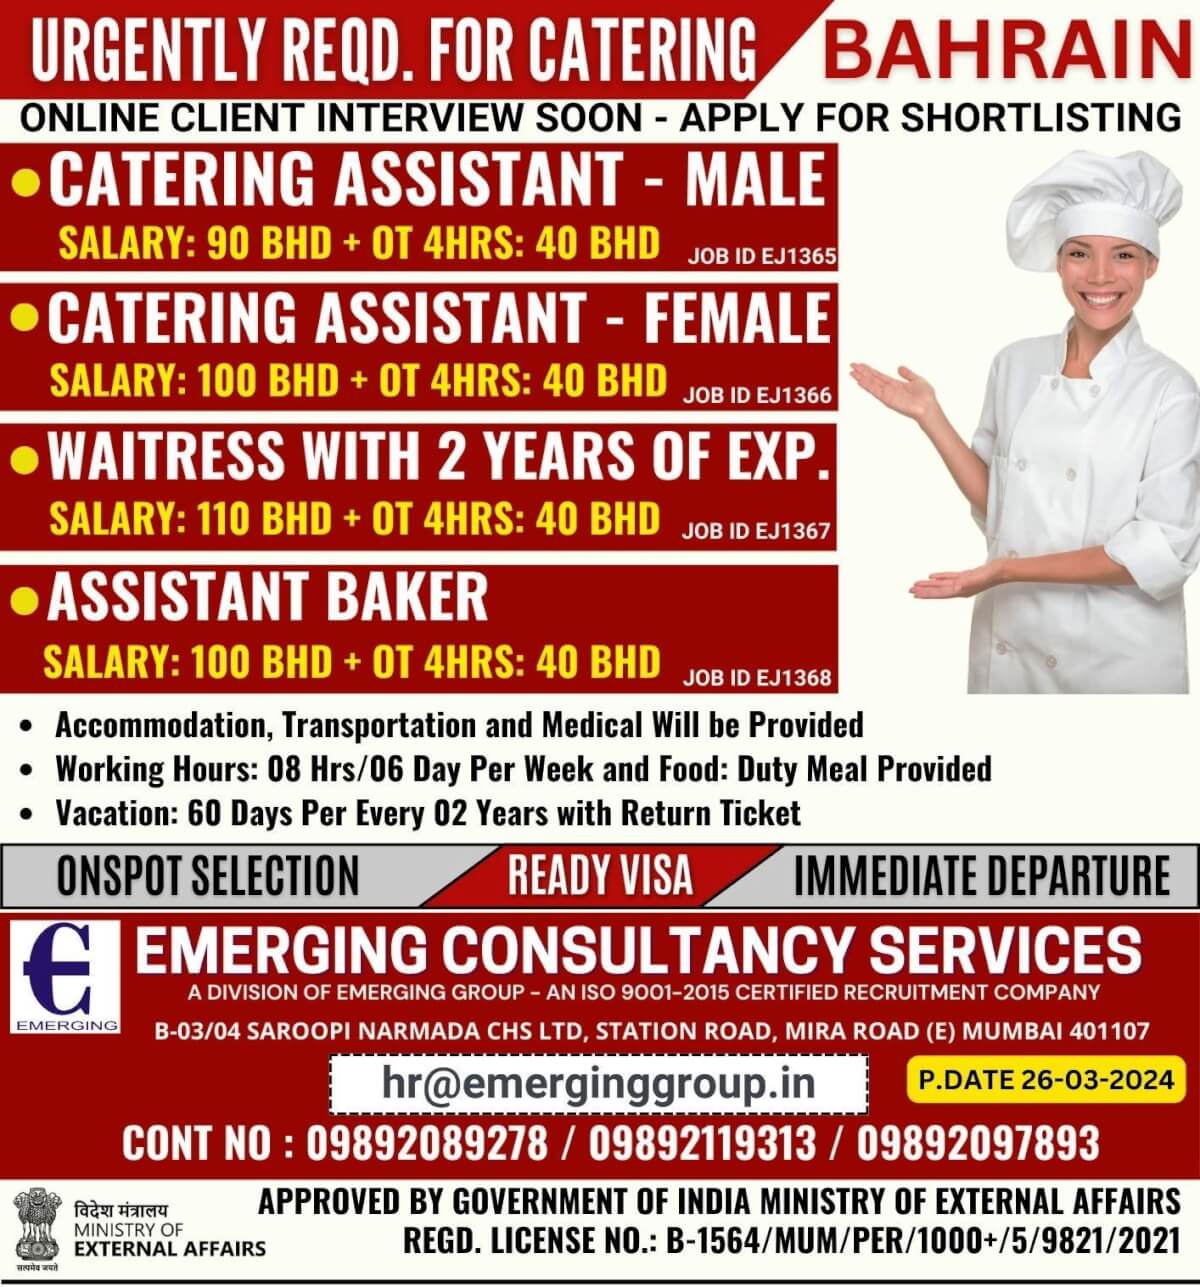 URGENTLY REQD. FOR CATERING  IN BAHRAIN